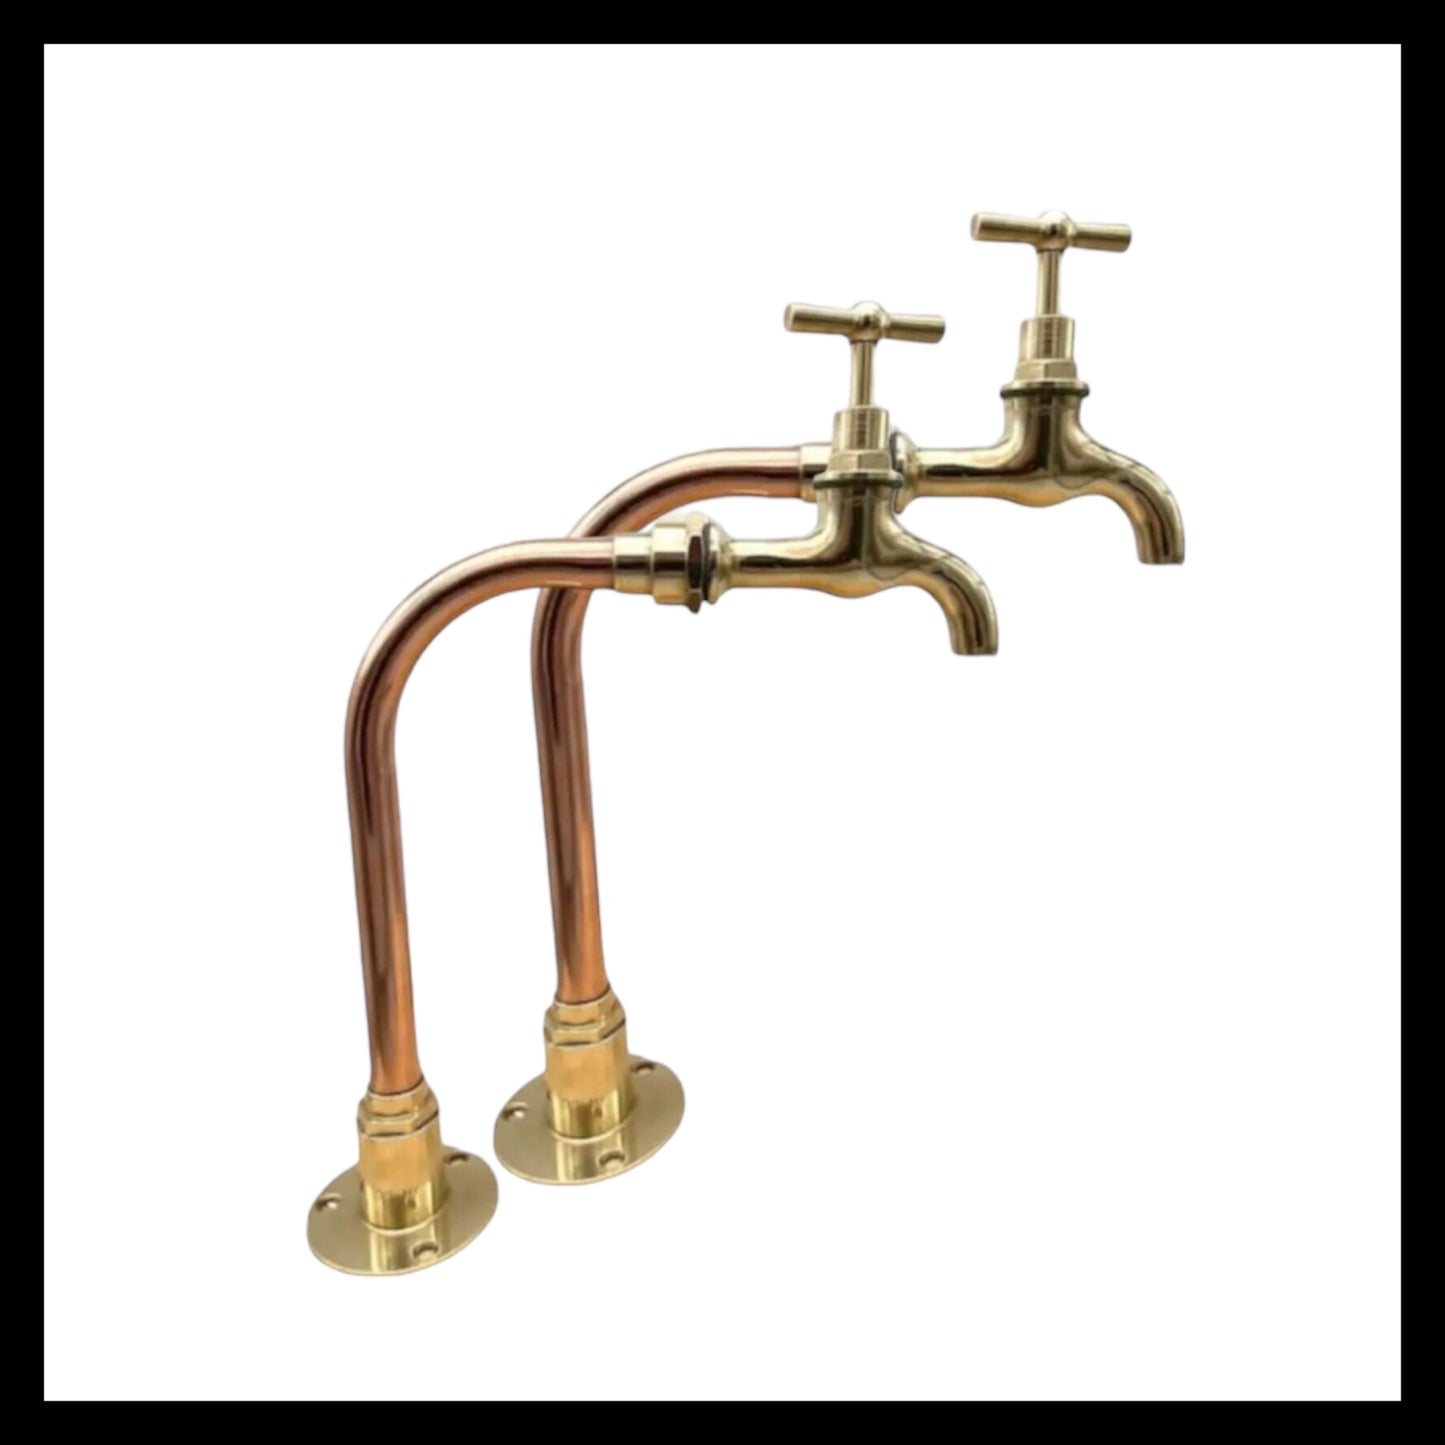 image rustic copper and brass kitchen Belfast sink taps sold by All Things French Store